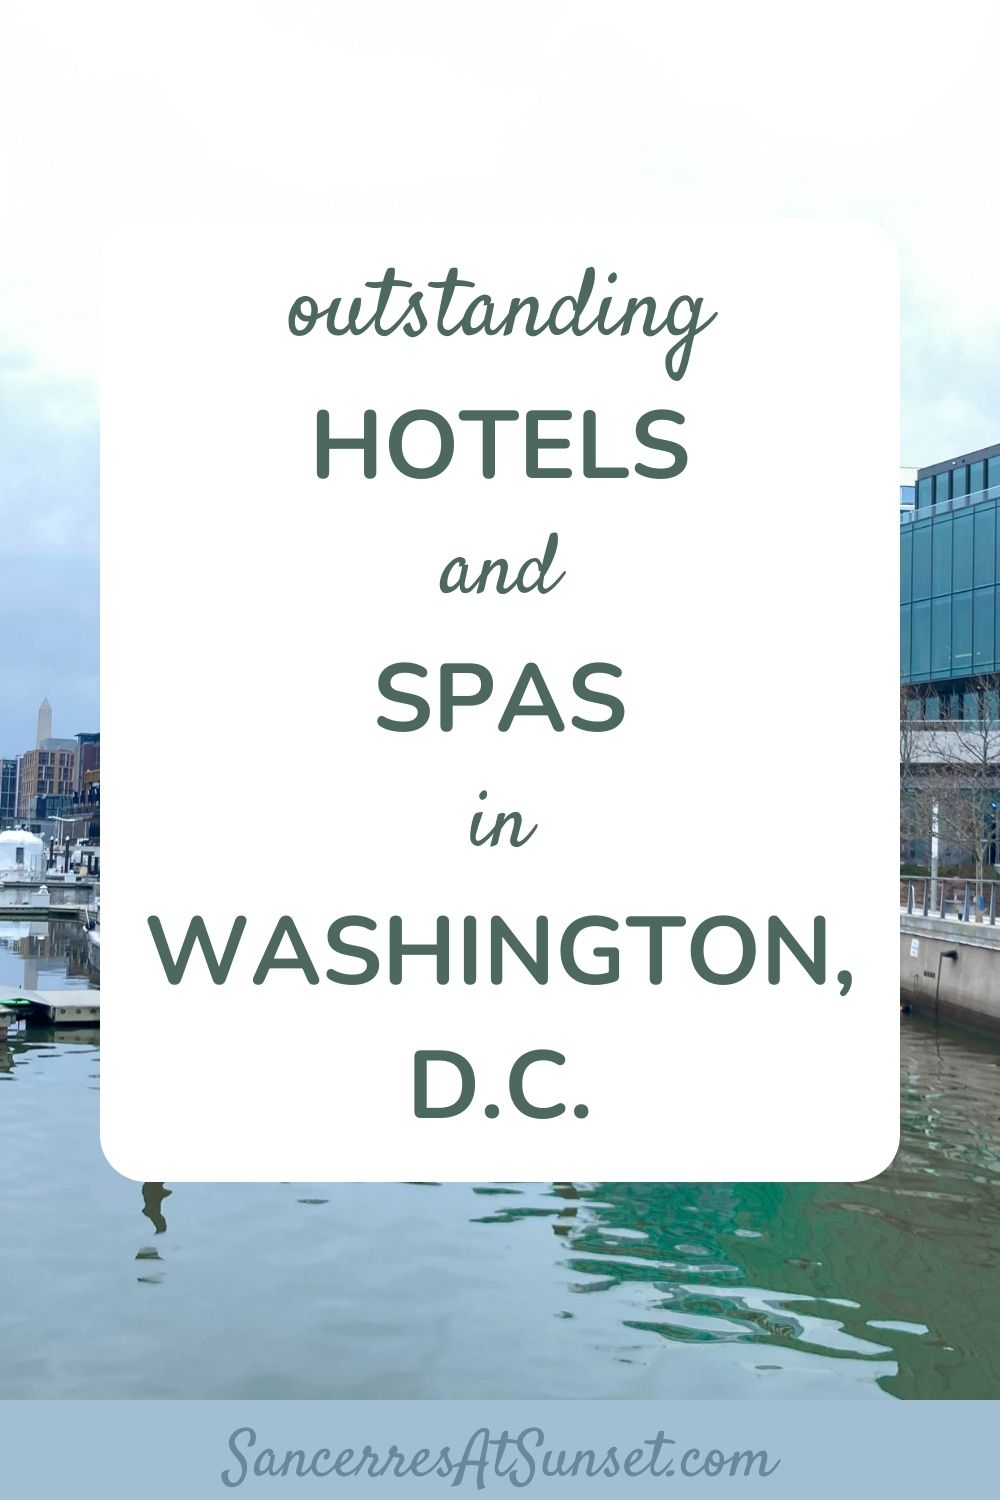 Two Washington, D.C., Hotels & Spas Win New Forbes Star Awards